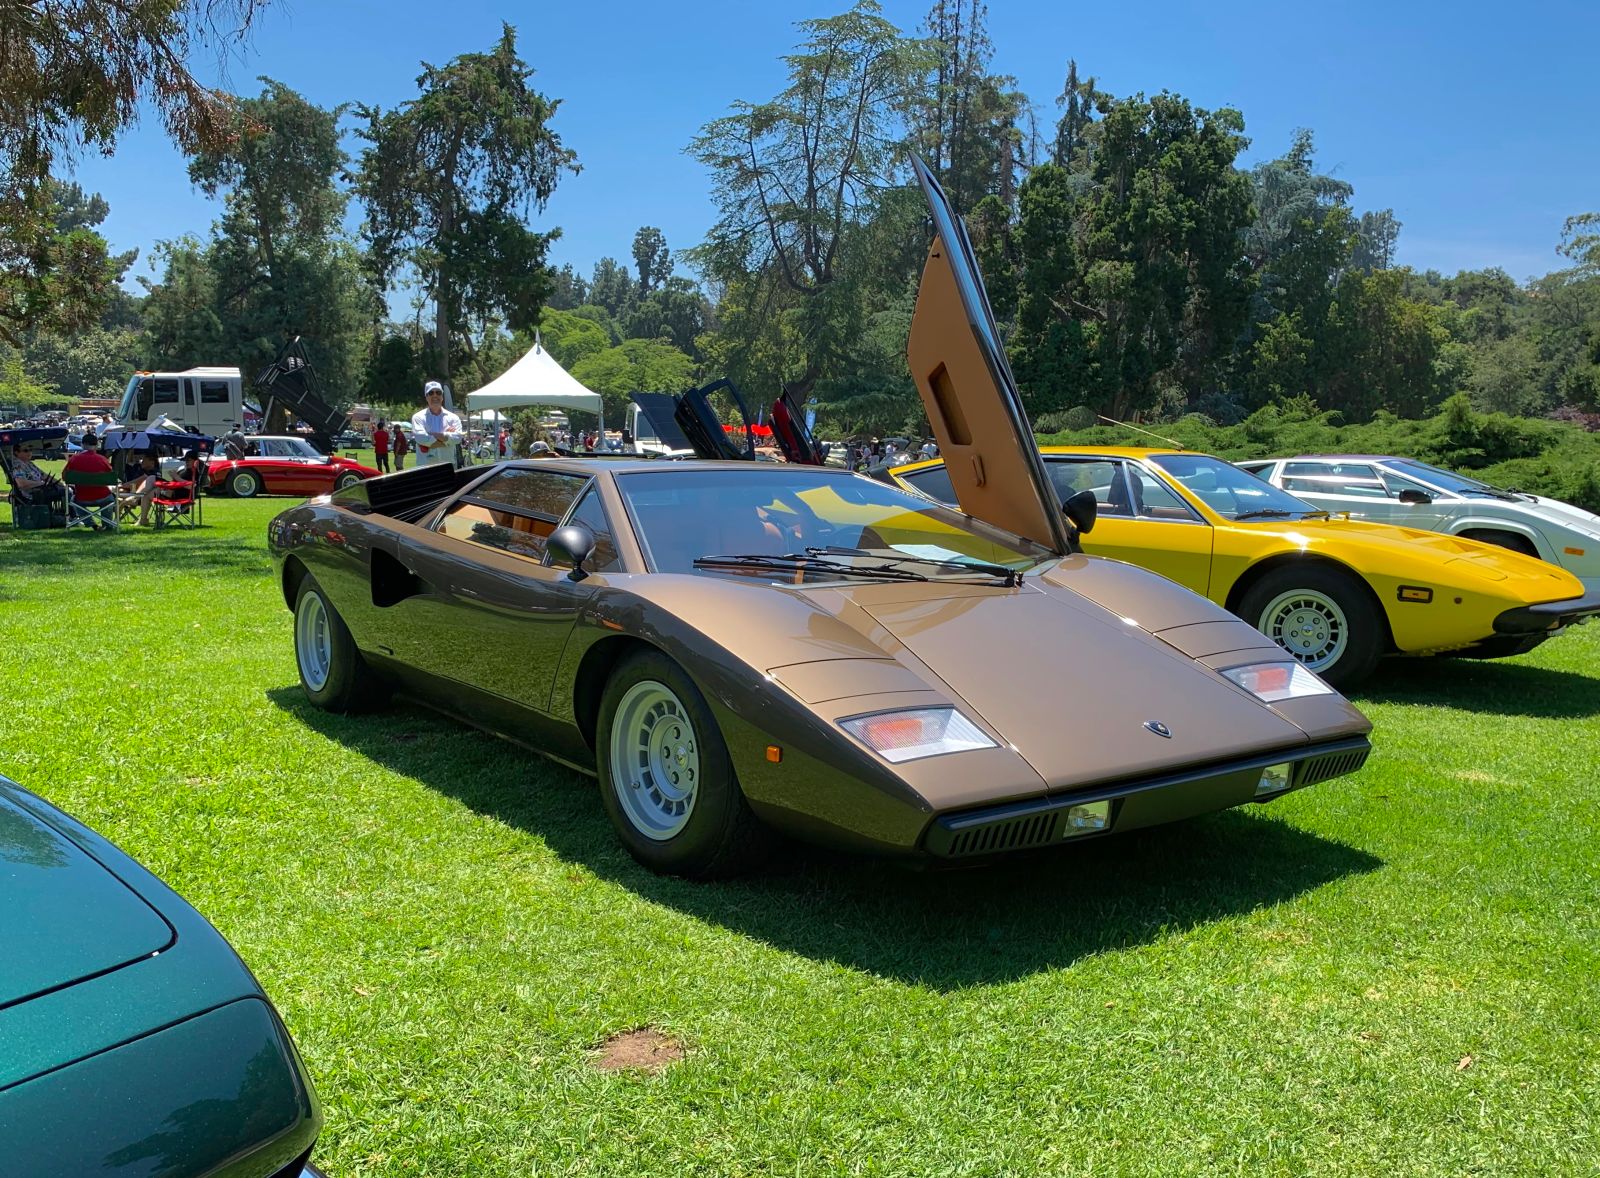 Brown Countach Periscope. The sight of this made me pass out.